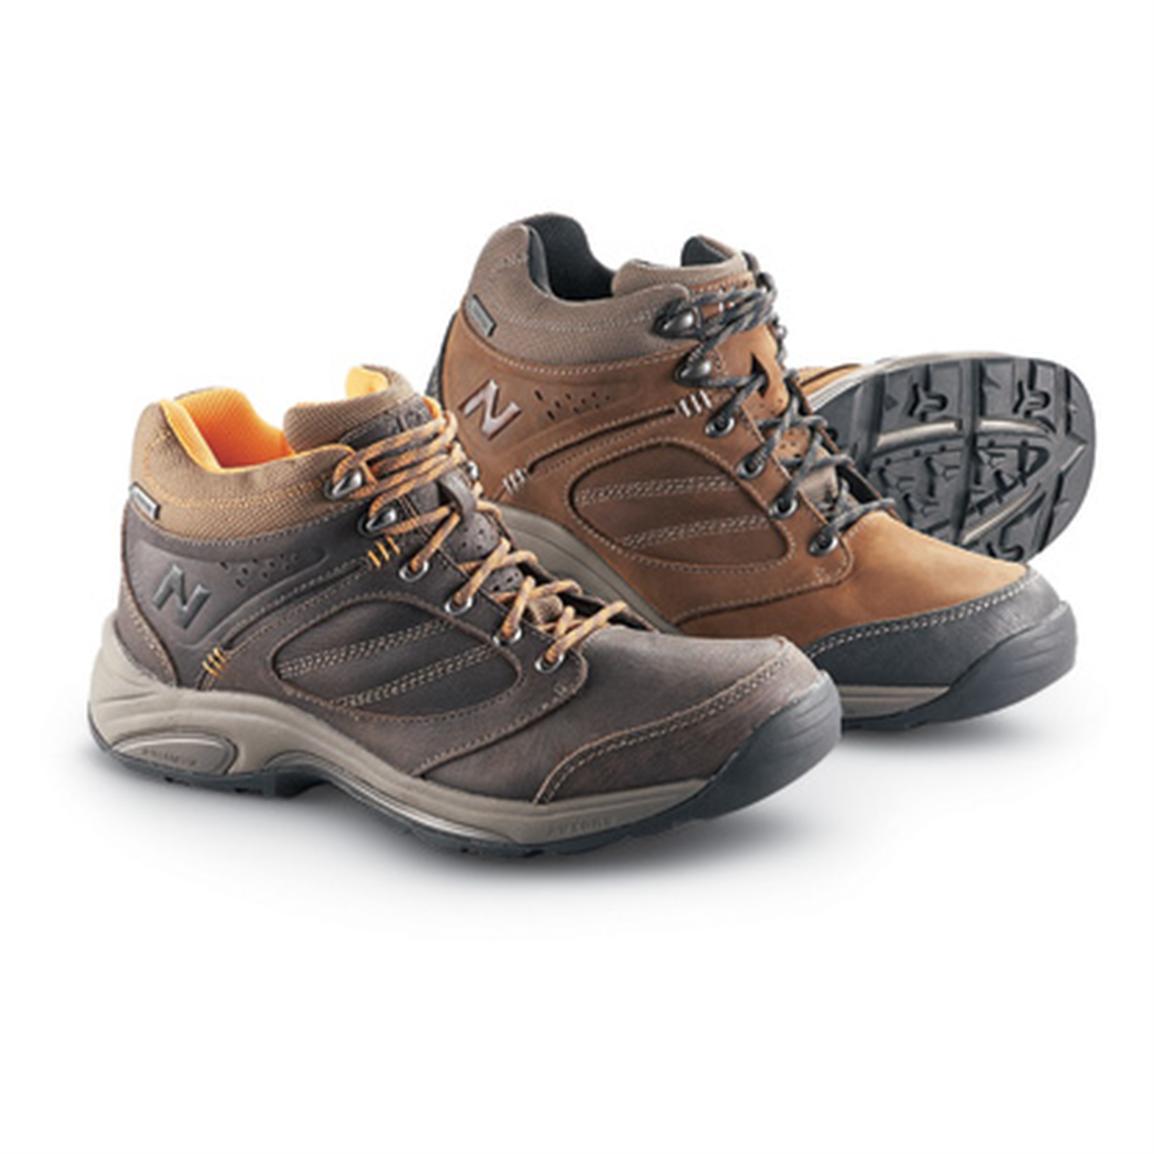 new balance hiking shoes for men